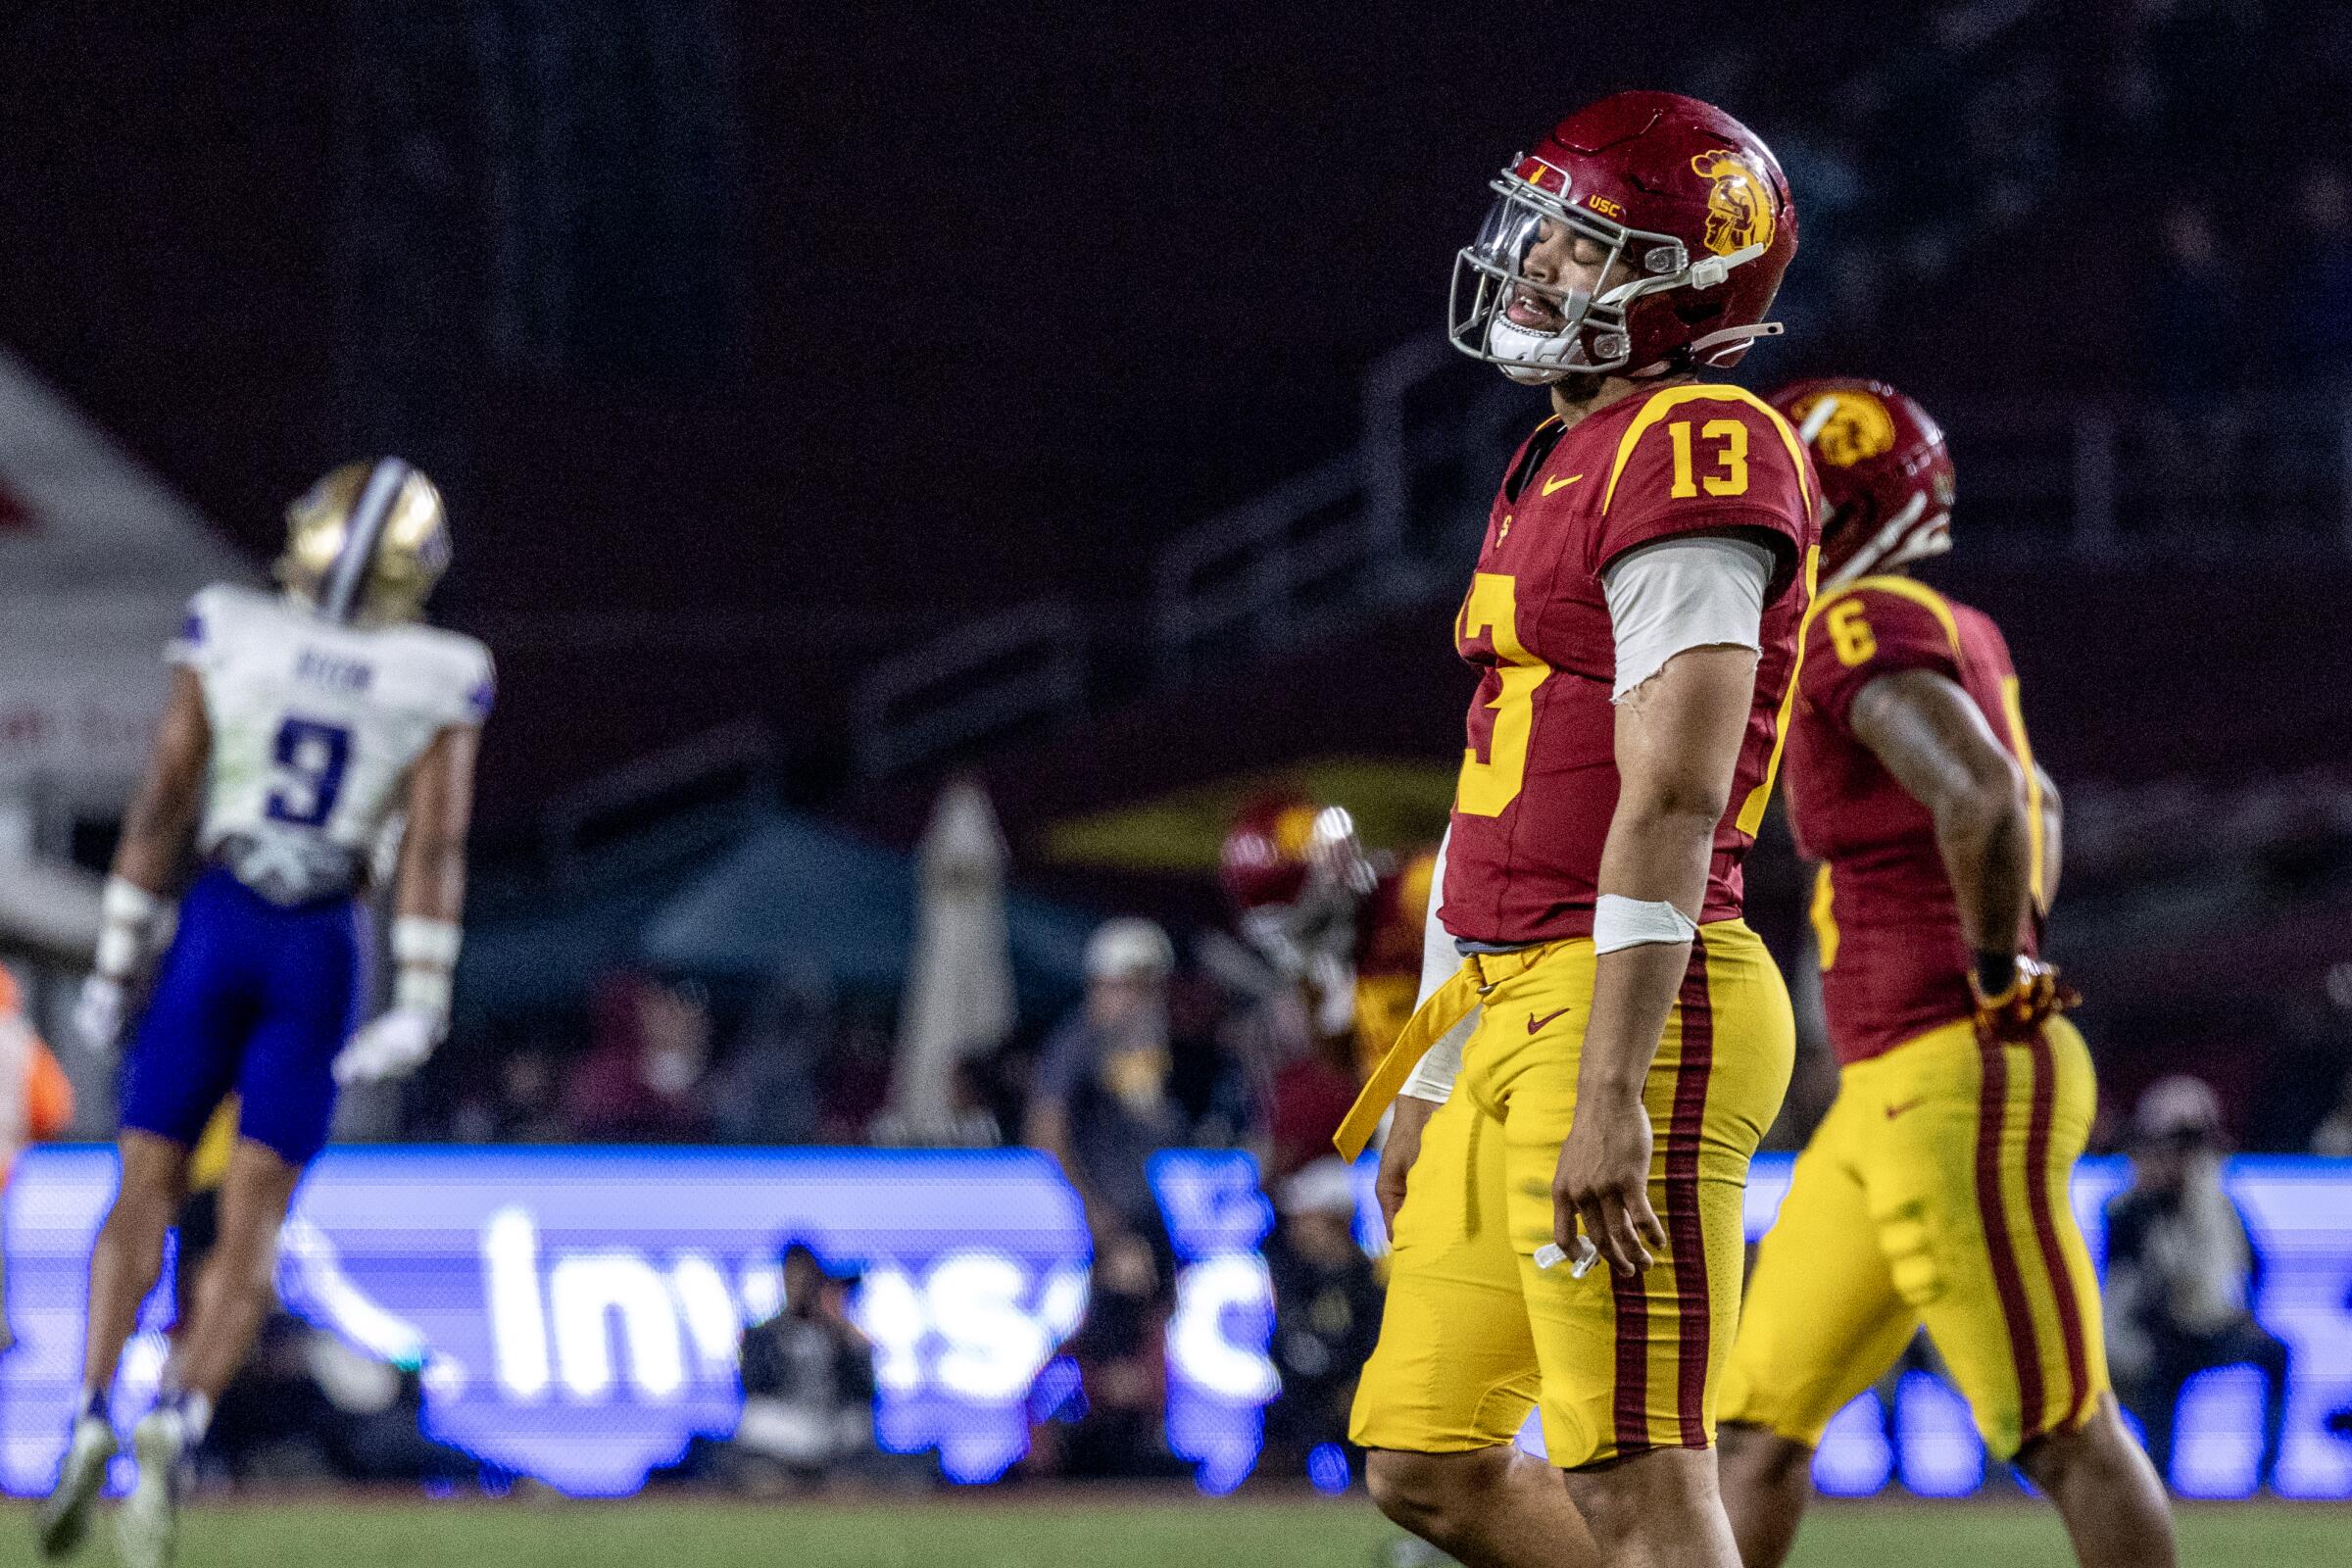 USC quarterback Caleb Williams walks off the field in the final moments of the Trojans' loss to Washington at the Coliseum.